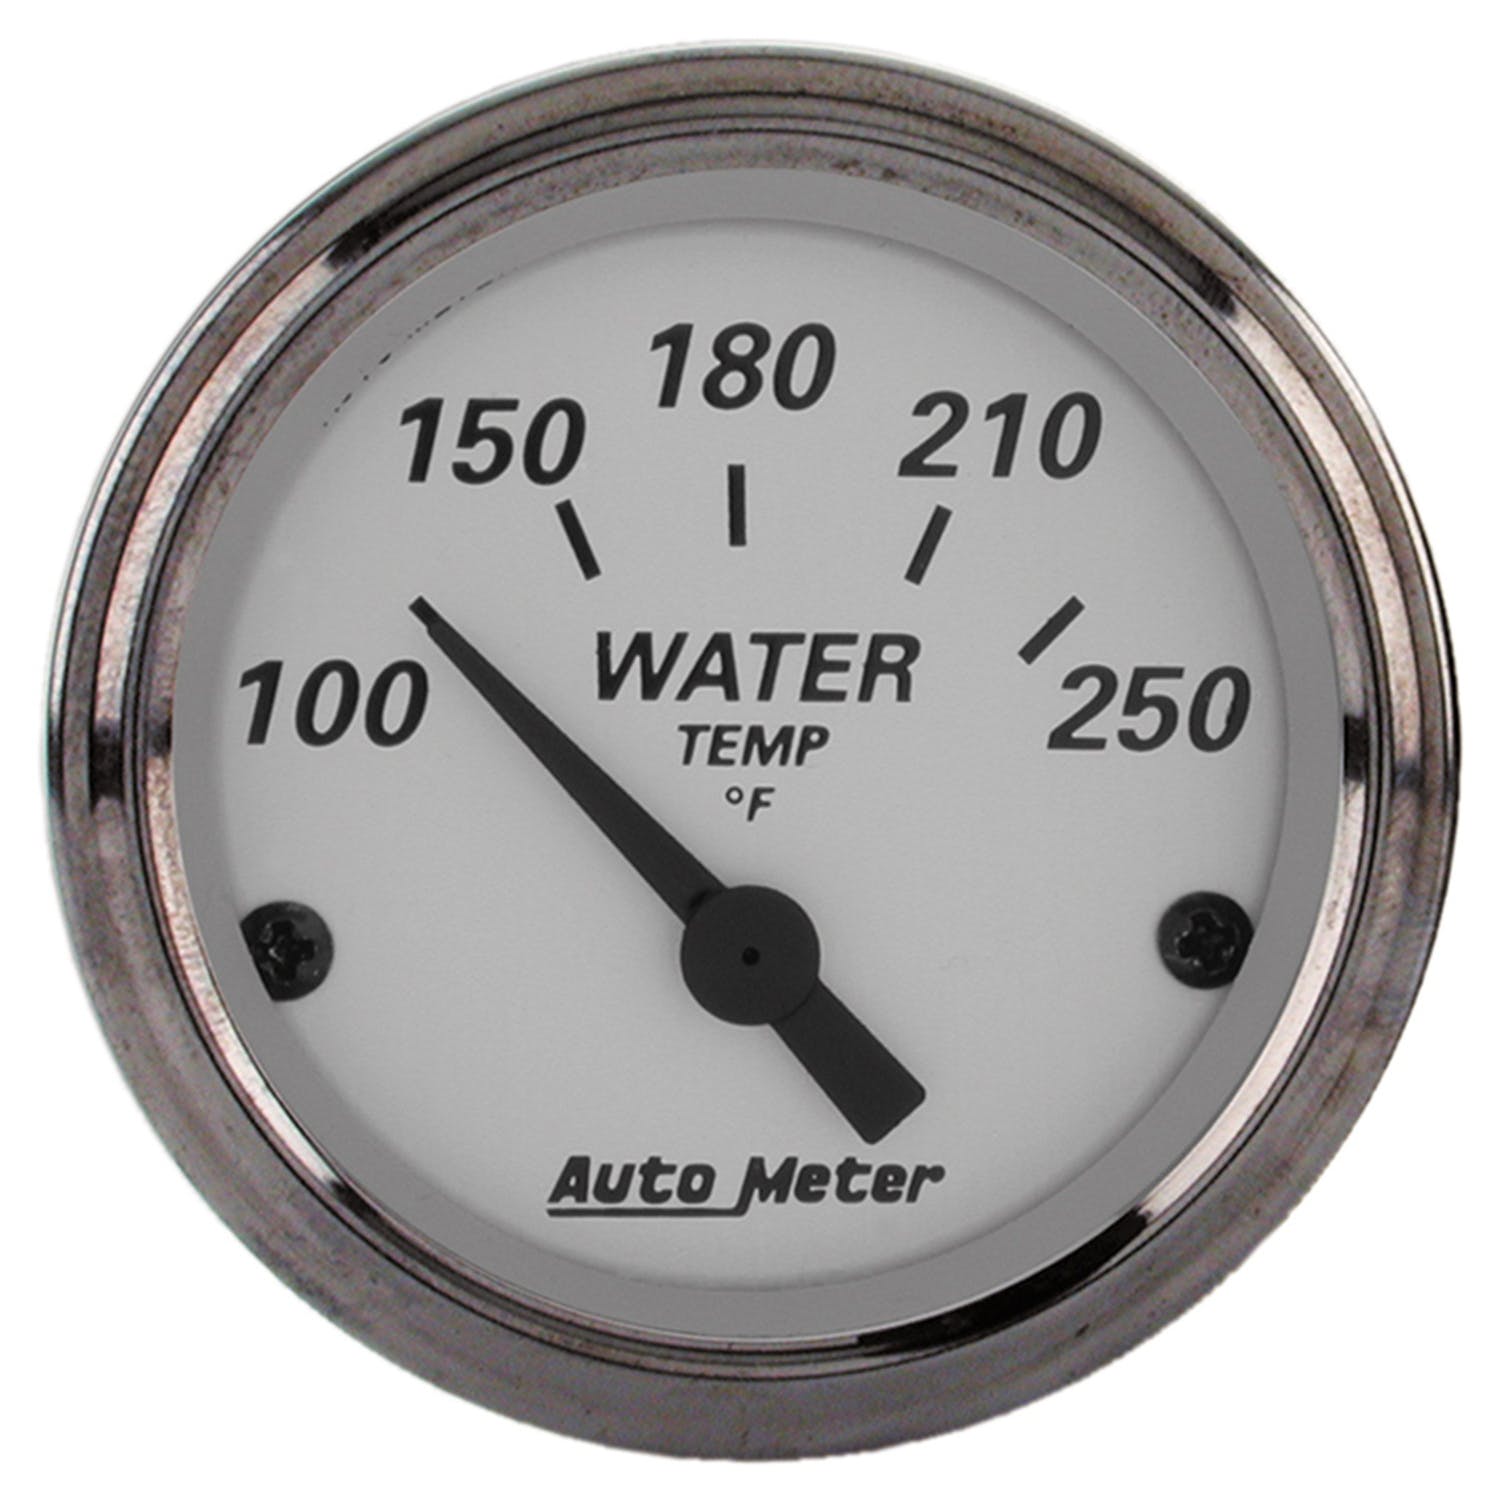 AutoMeter Products 1938 GAUGE; WATER TEMP; 2 1/16in.; 250° F; ELEC; AMERICAN PLATINUM